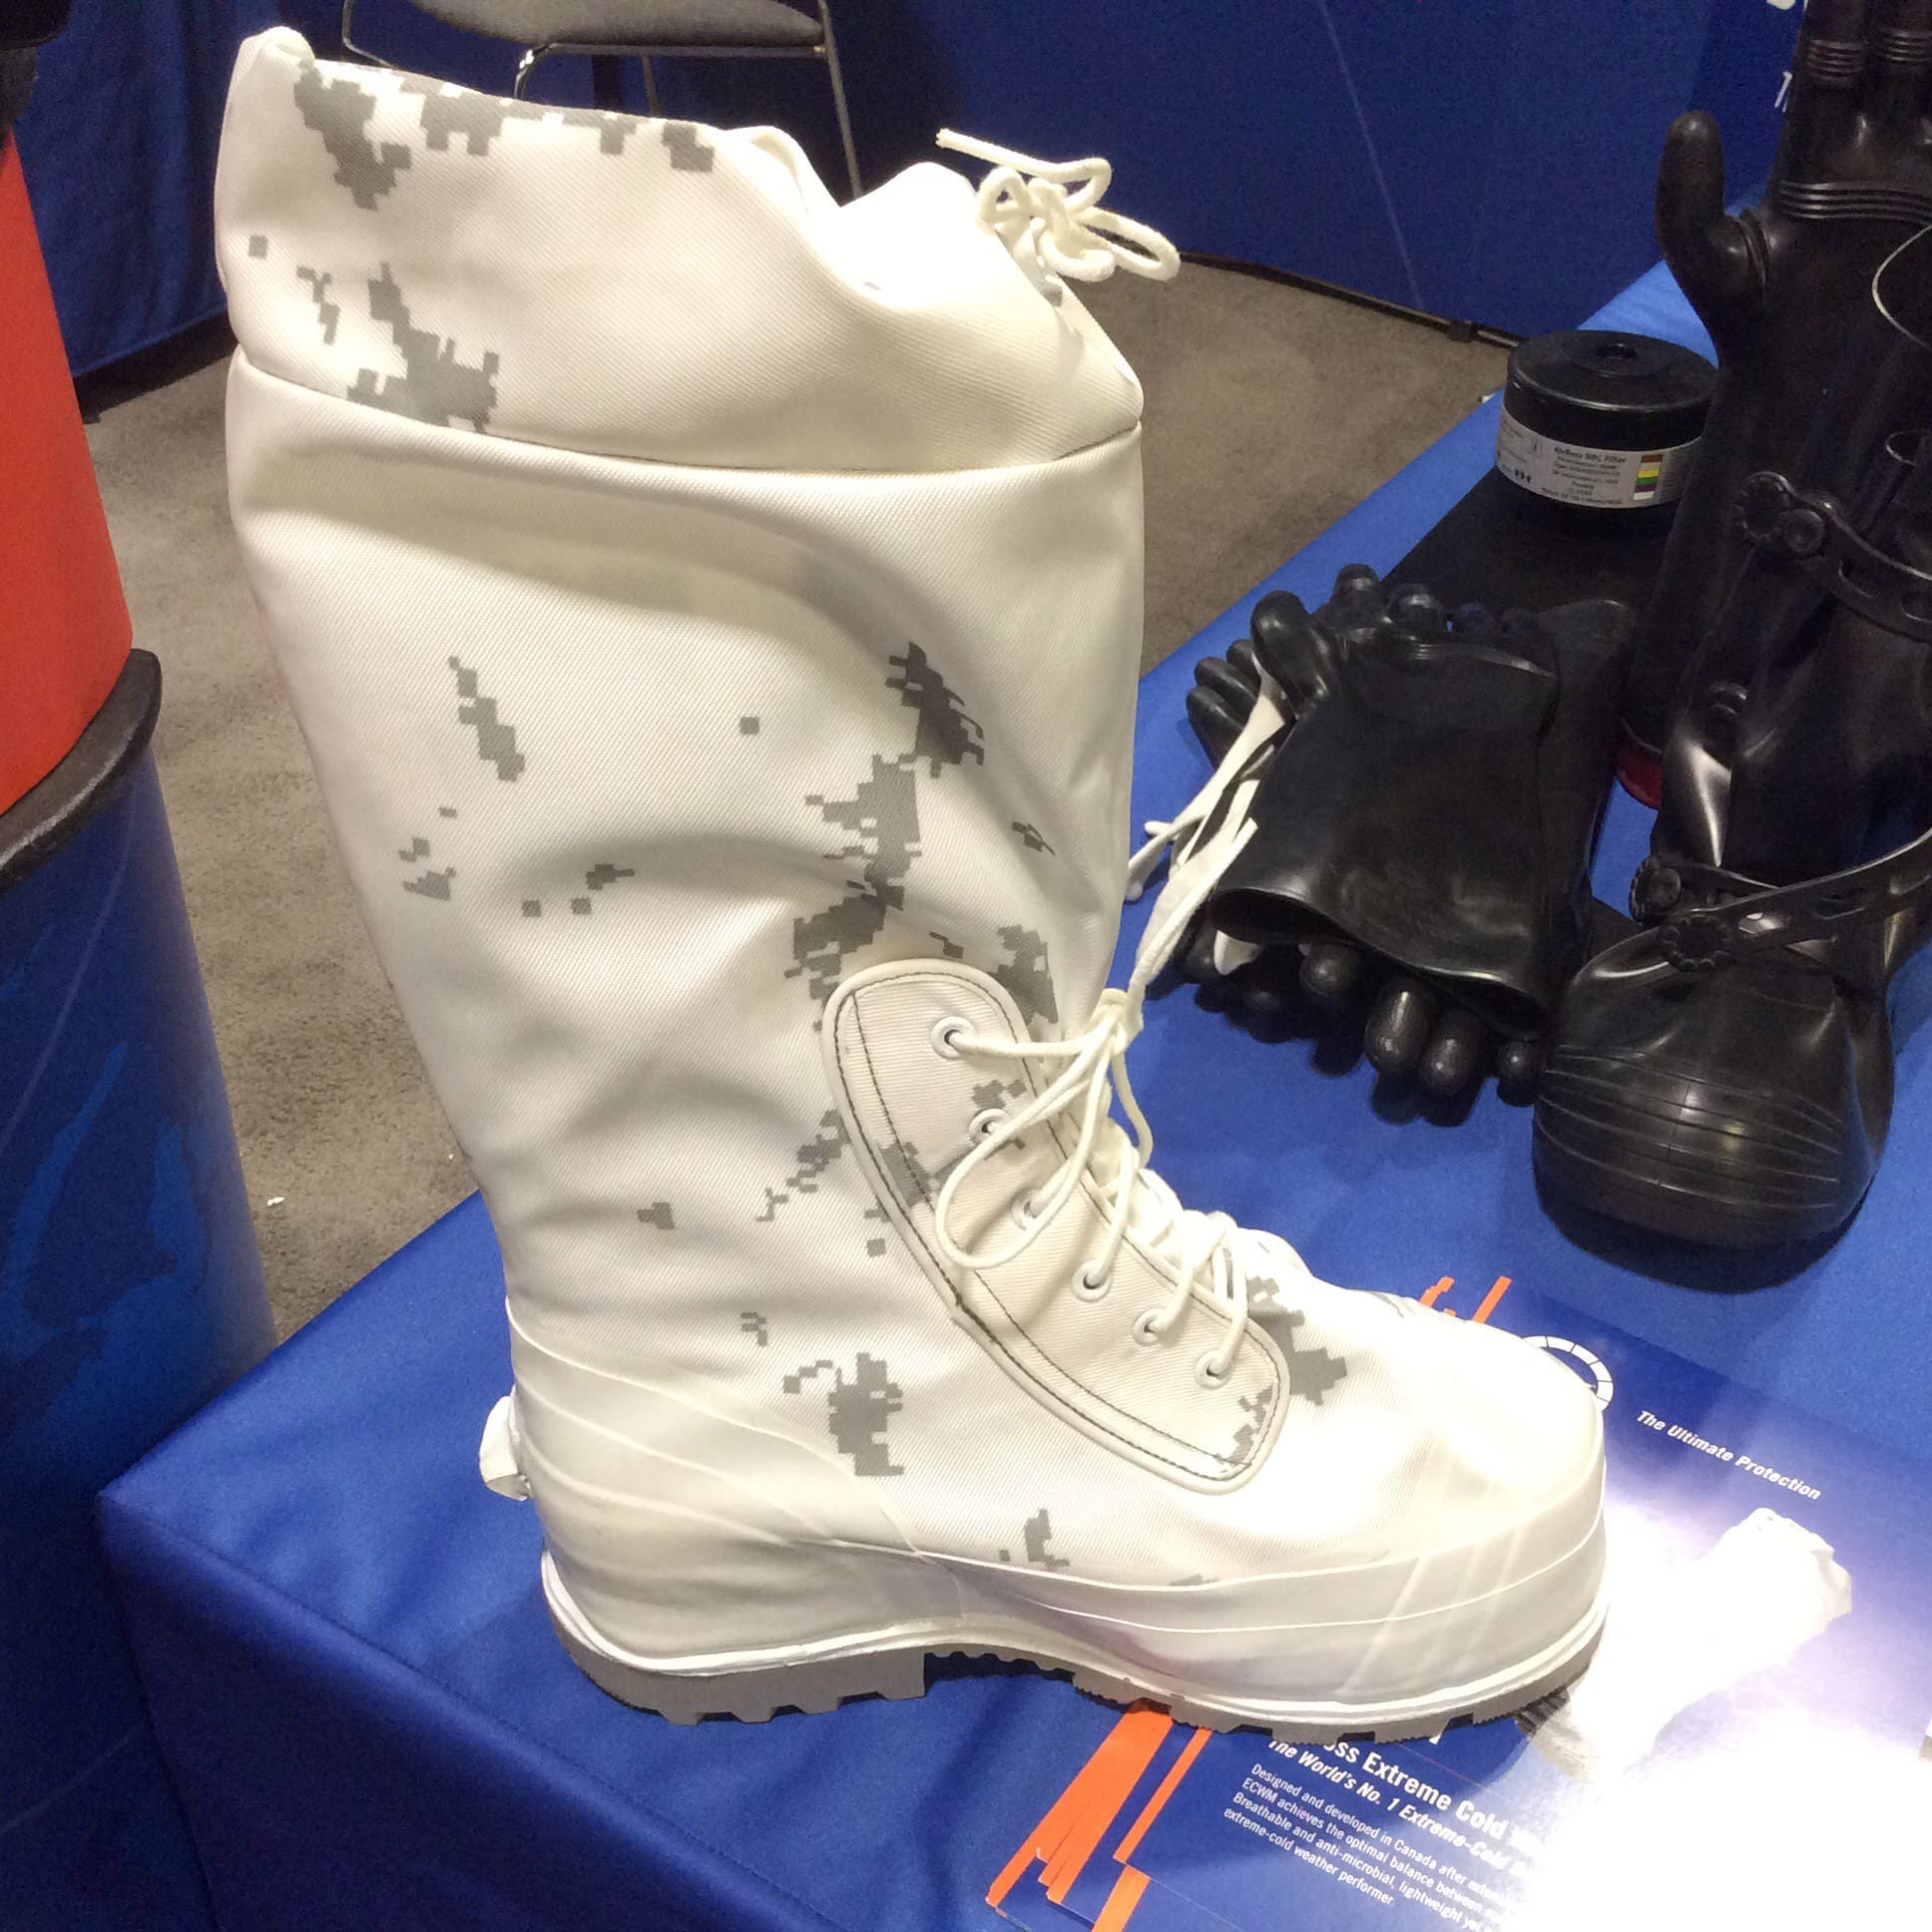 The current U.S. Issue Vapor Barrier Boot is very labor intensive to produc...